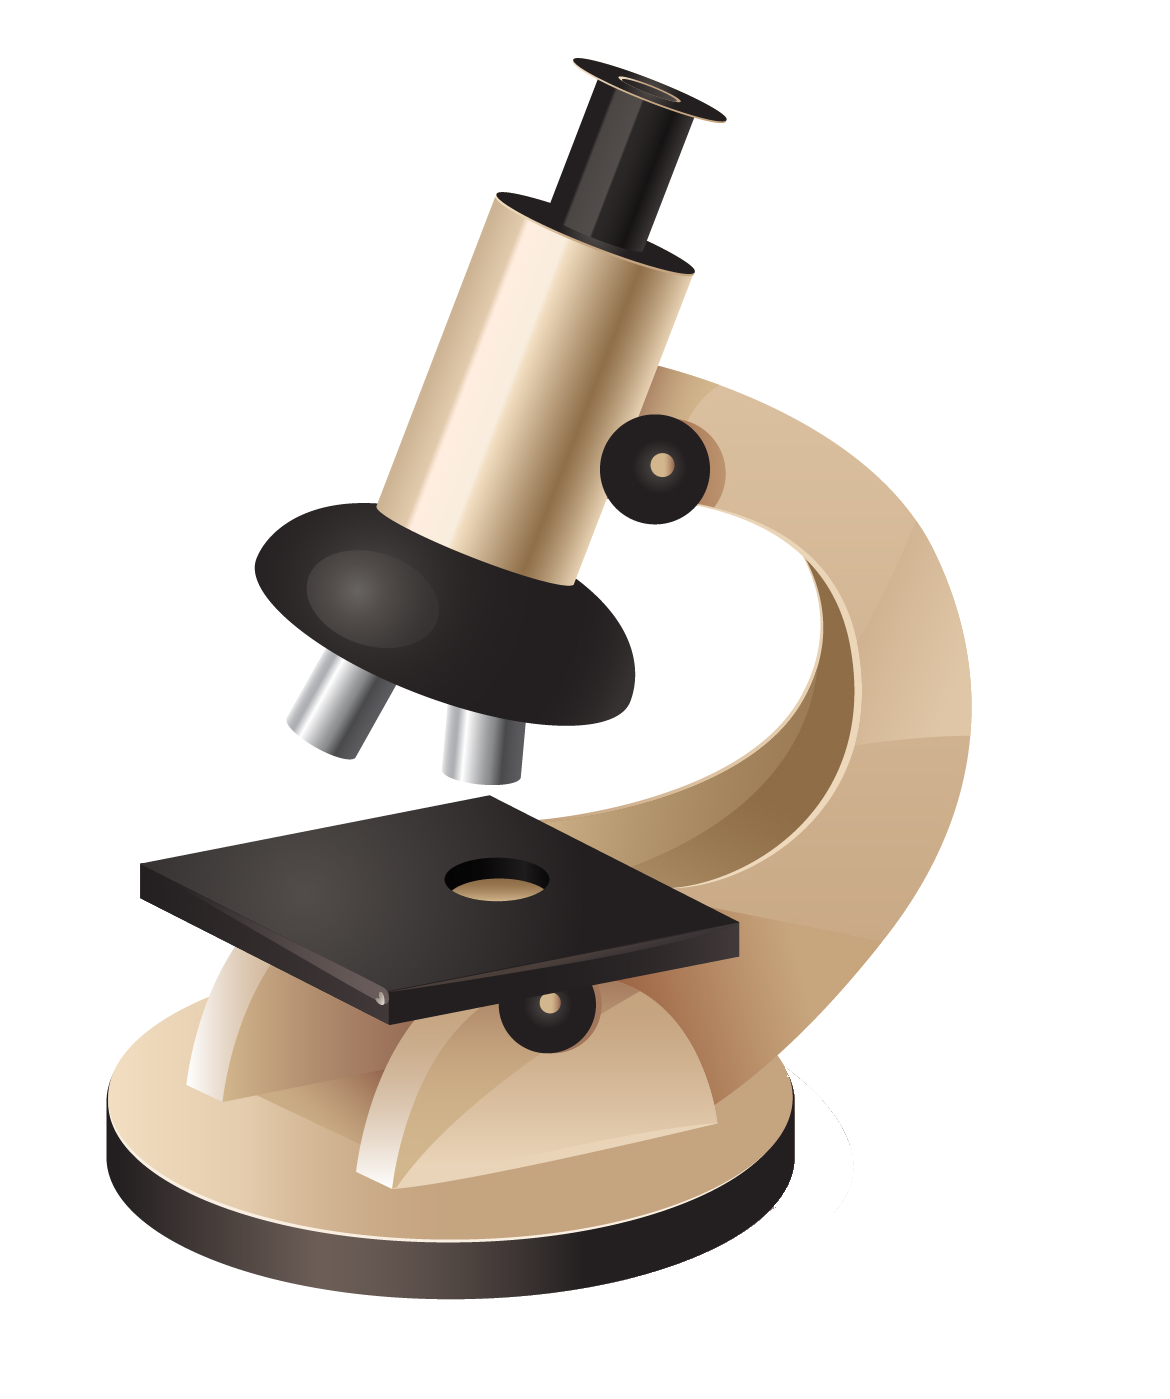 Png images free download. Scientist clipart microscope